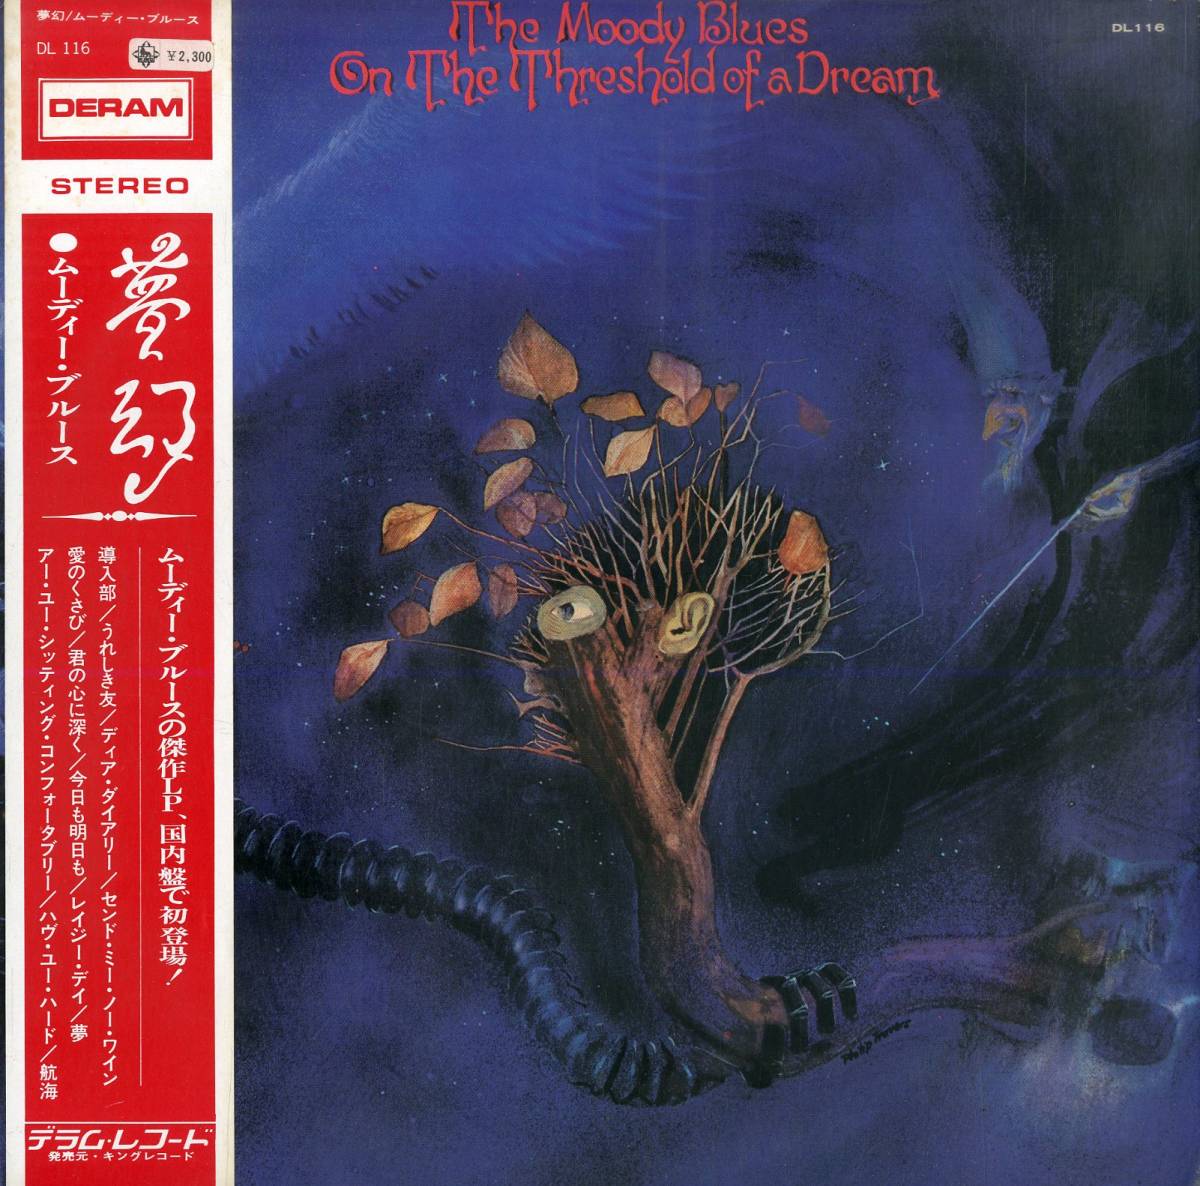 A00573425/LP/ムーディー・ブルース (THE MOODY BLUES)「On The Threshold Of A Dream 夢幻 (1974年・DL-116・サイケデリックロック・シ_画像1